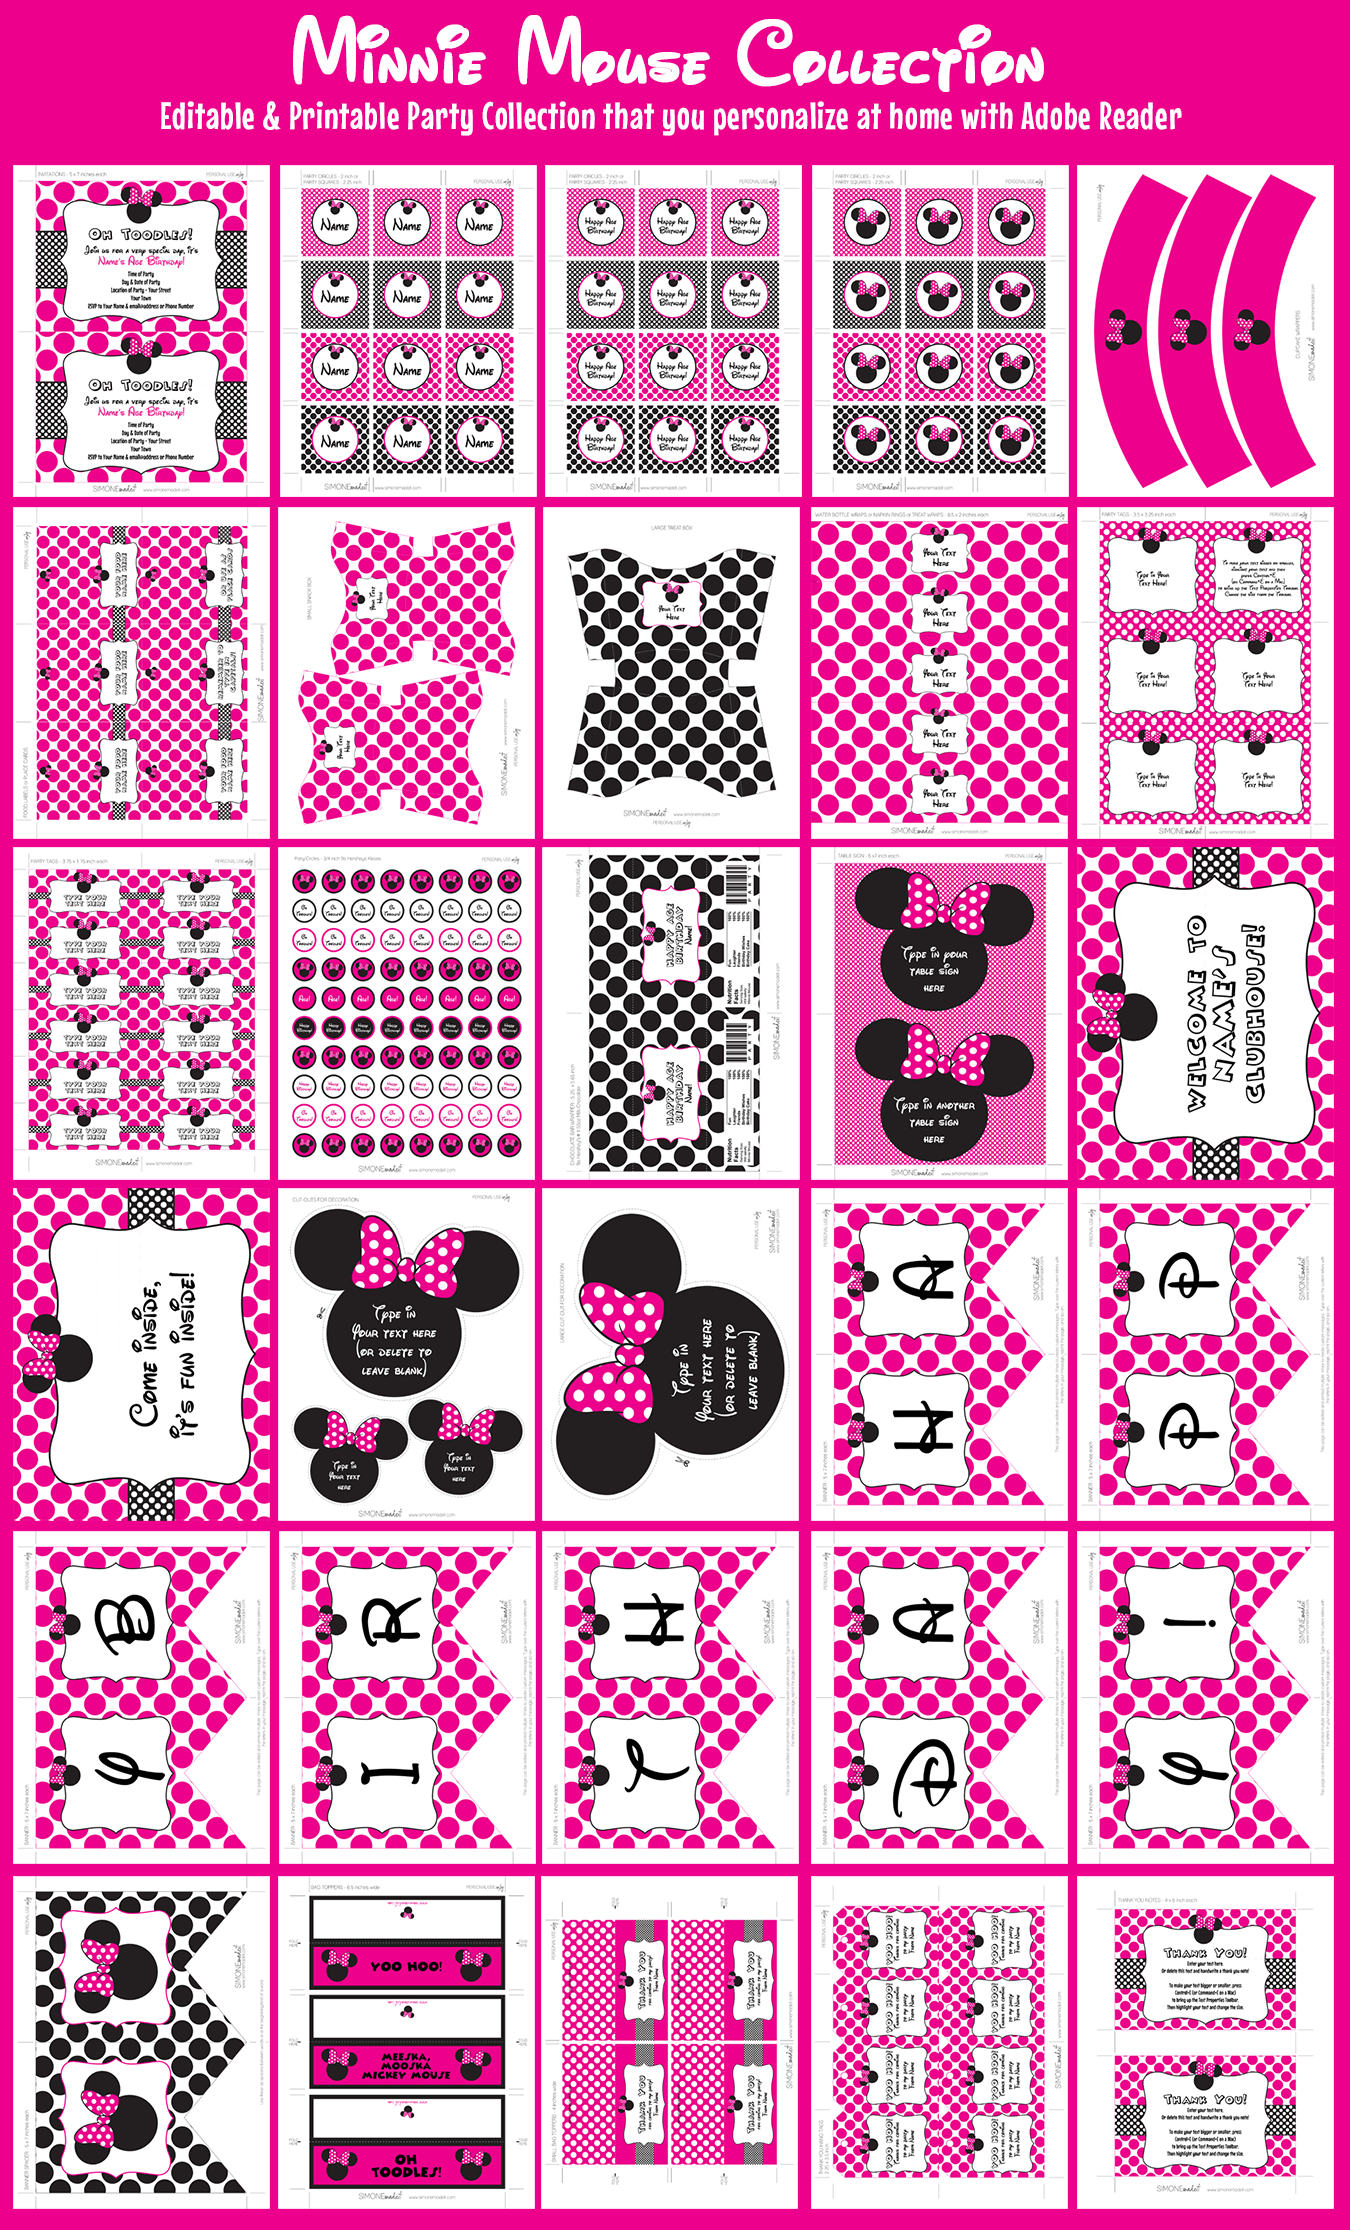 minnie-mouse-party-printables-invitations-decorations-templates